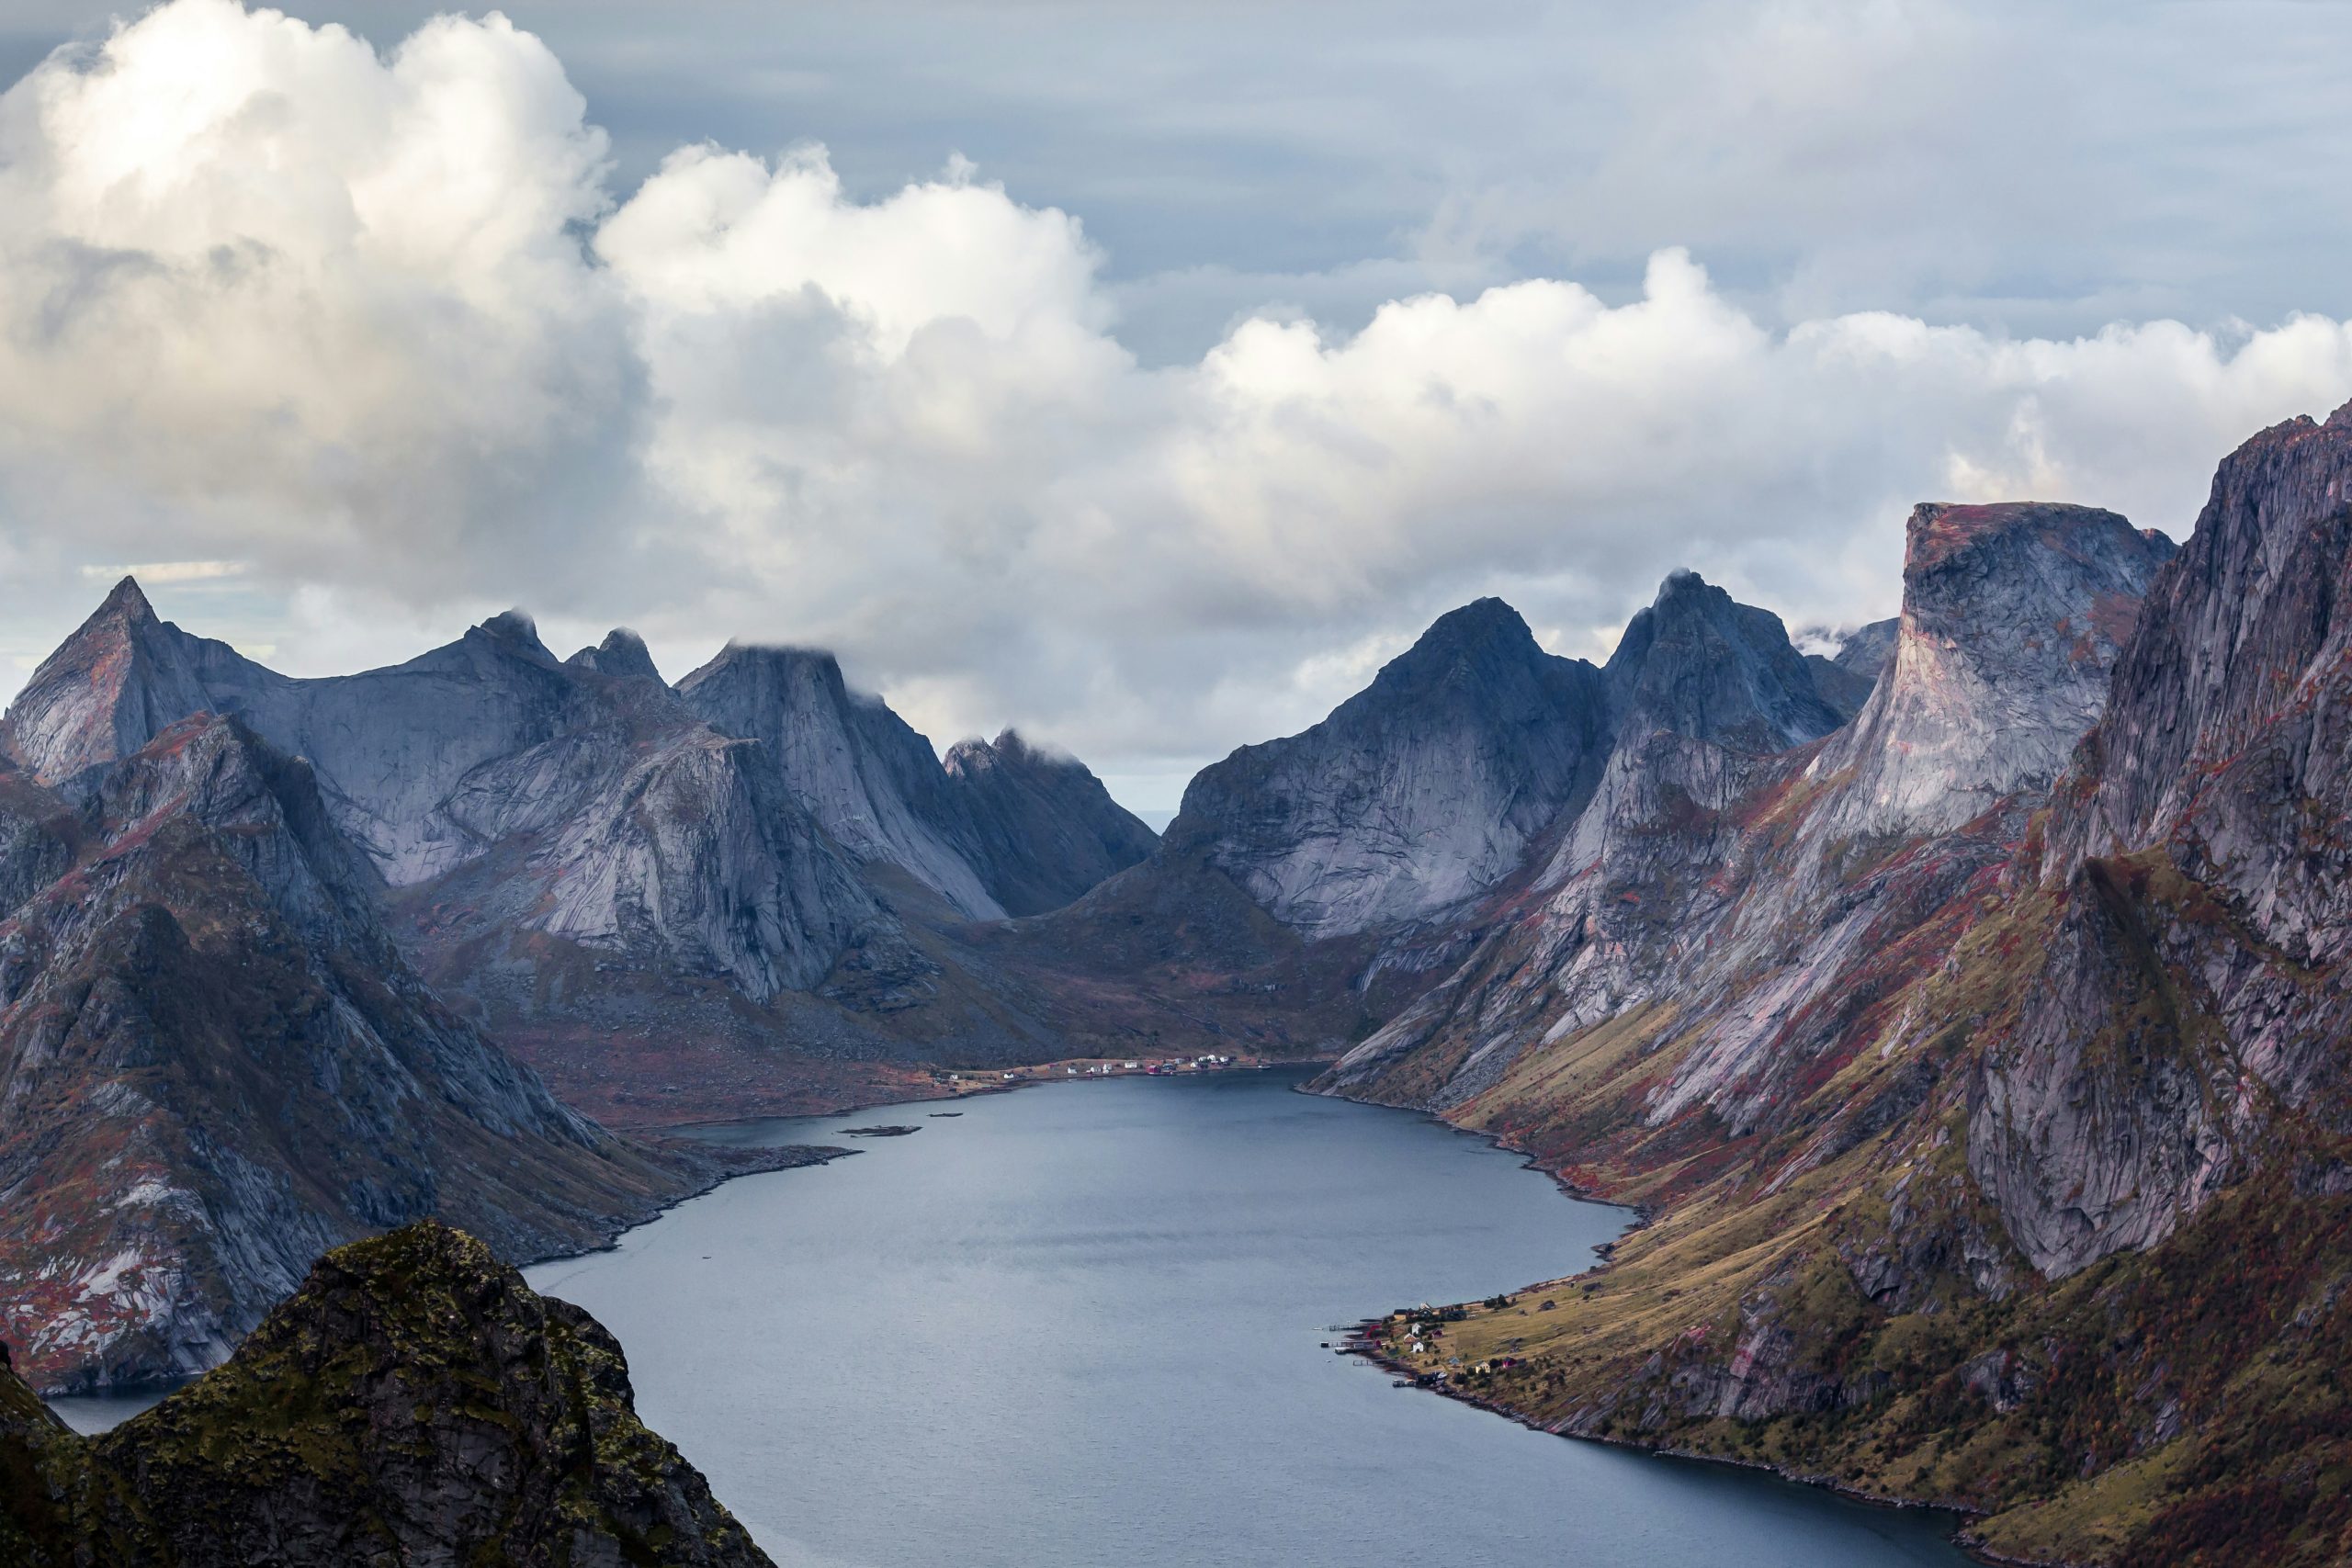 explore the stunning fjords with their deep blue waters and towering cliffs, a natural wonder that will take your breath away.